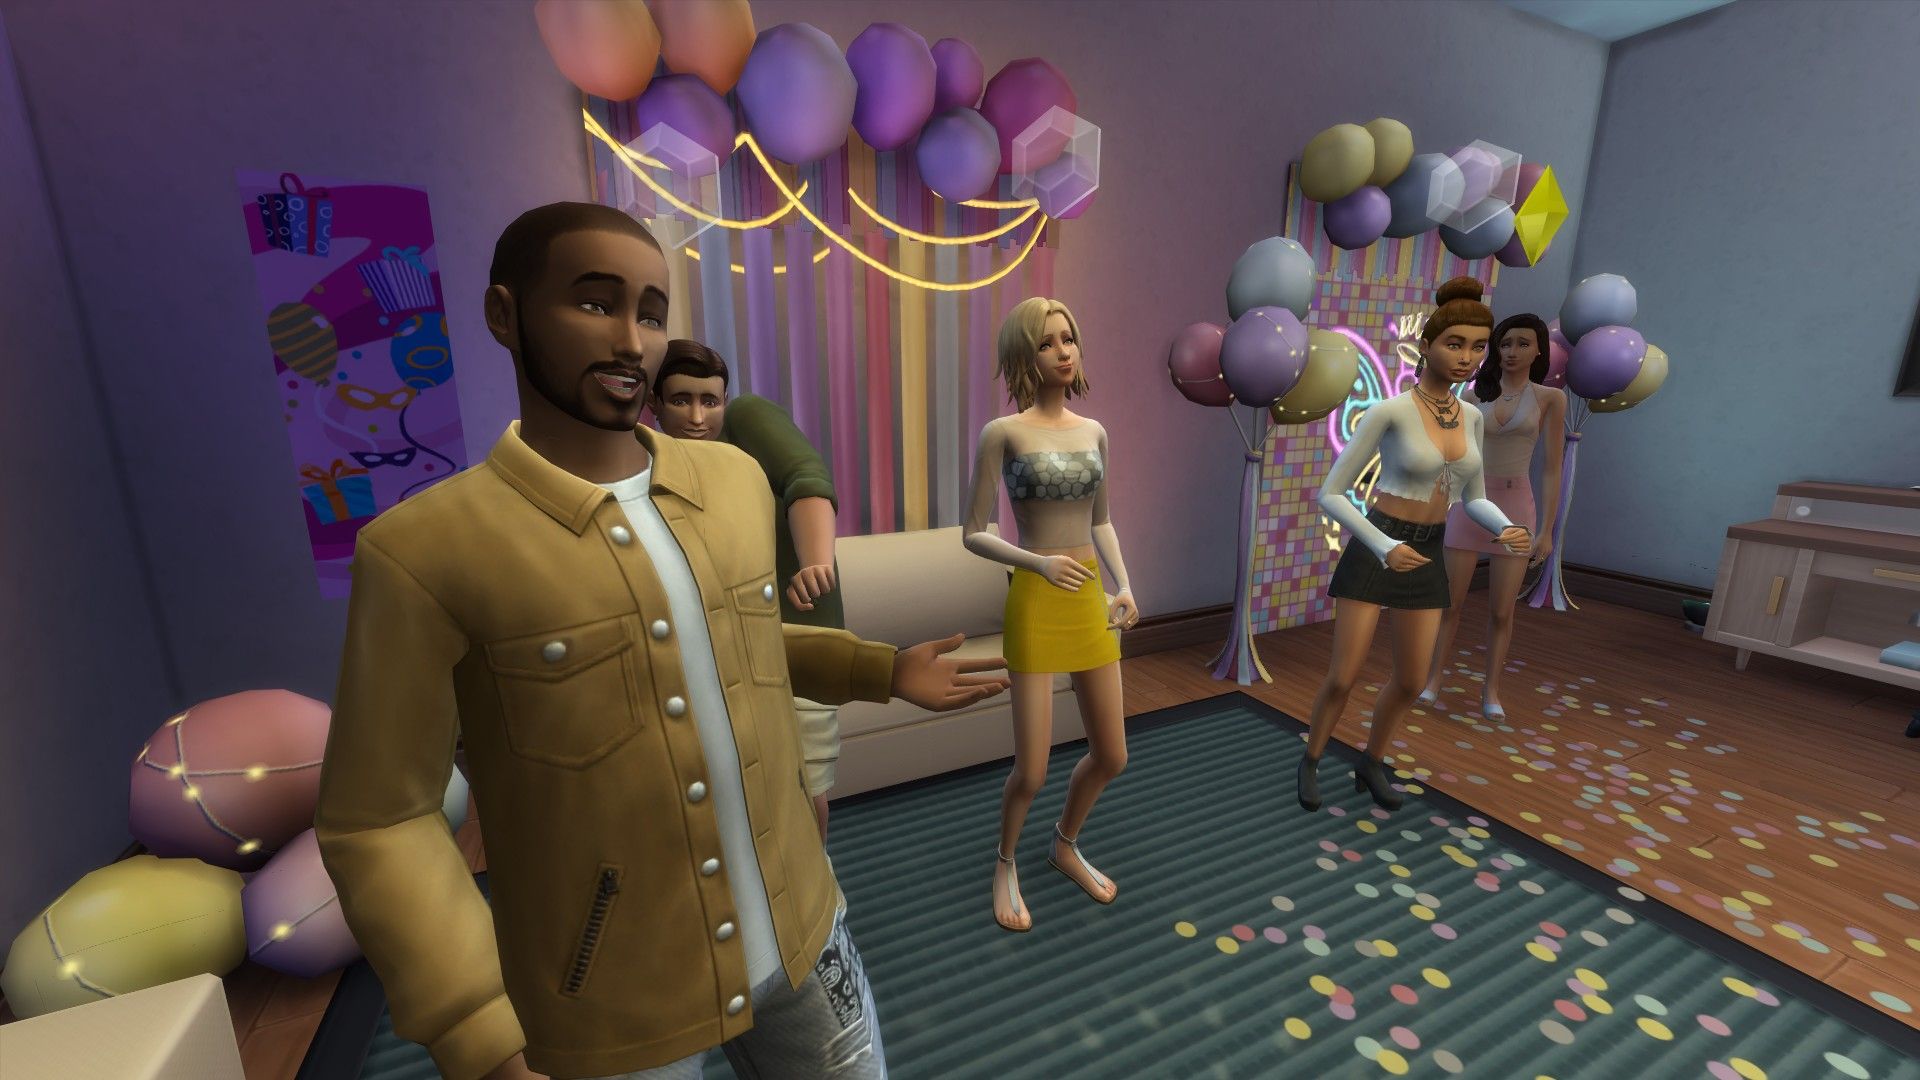 sims talking at a party the sims 4 party essentials kit